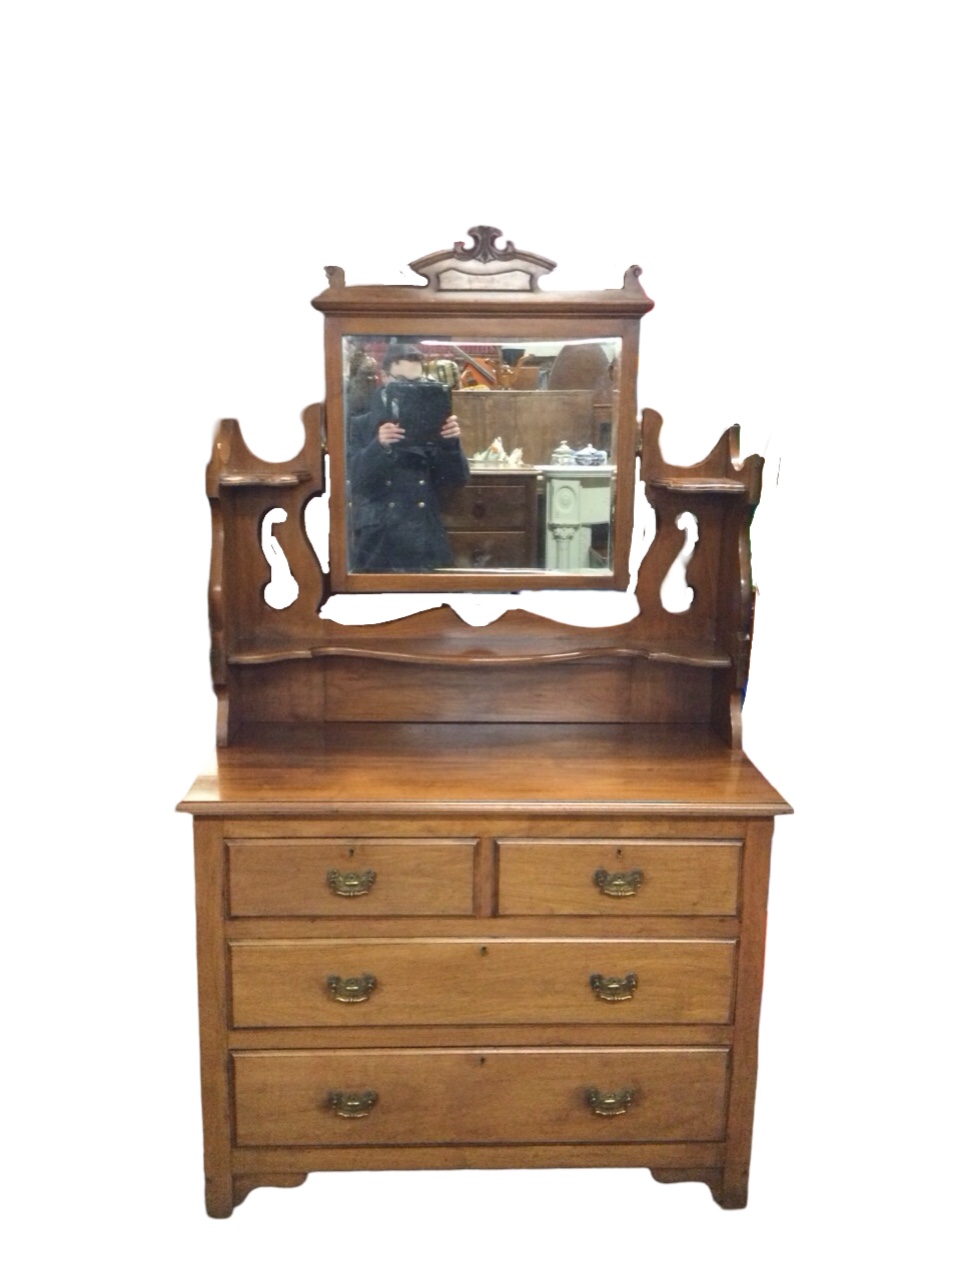 An Edwardian mahogany CWS Pelaw wardrobe and dressing table, the robe with pediment and moulded - Image 2 of 3